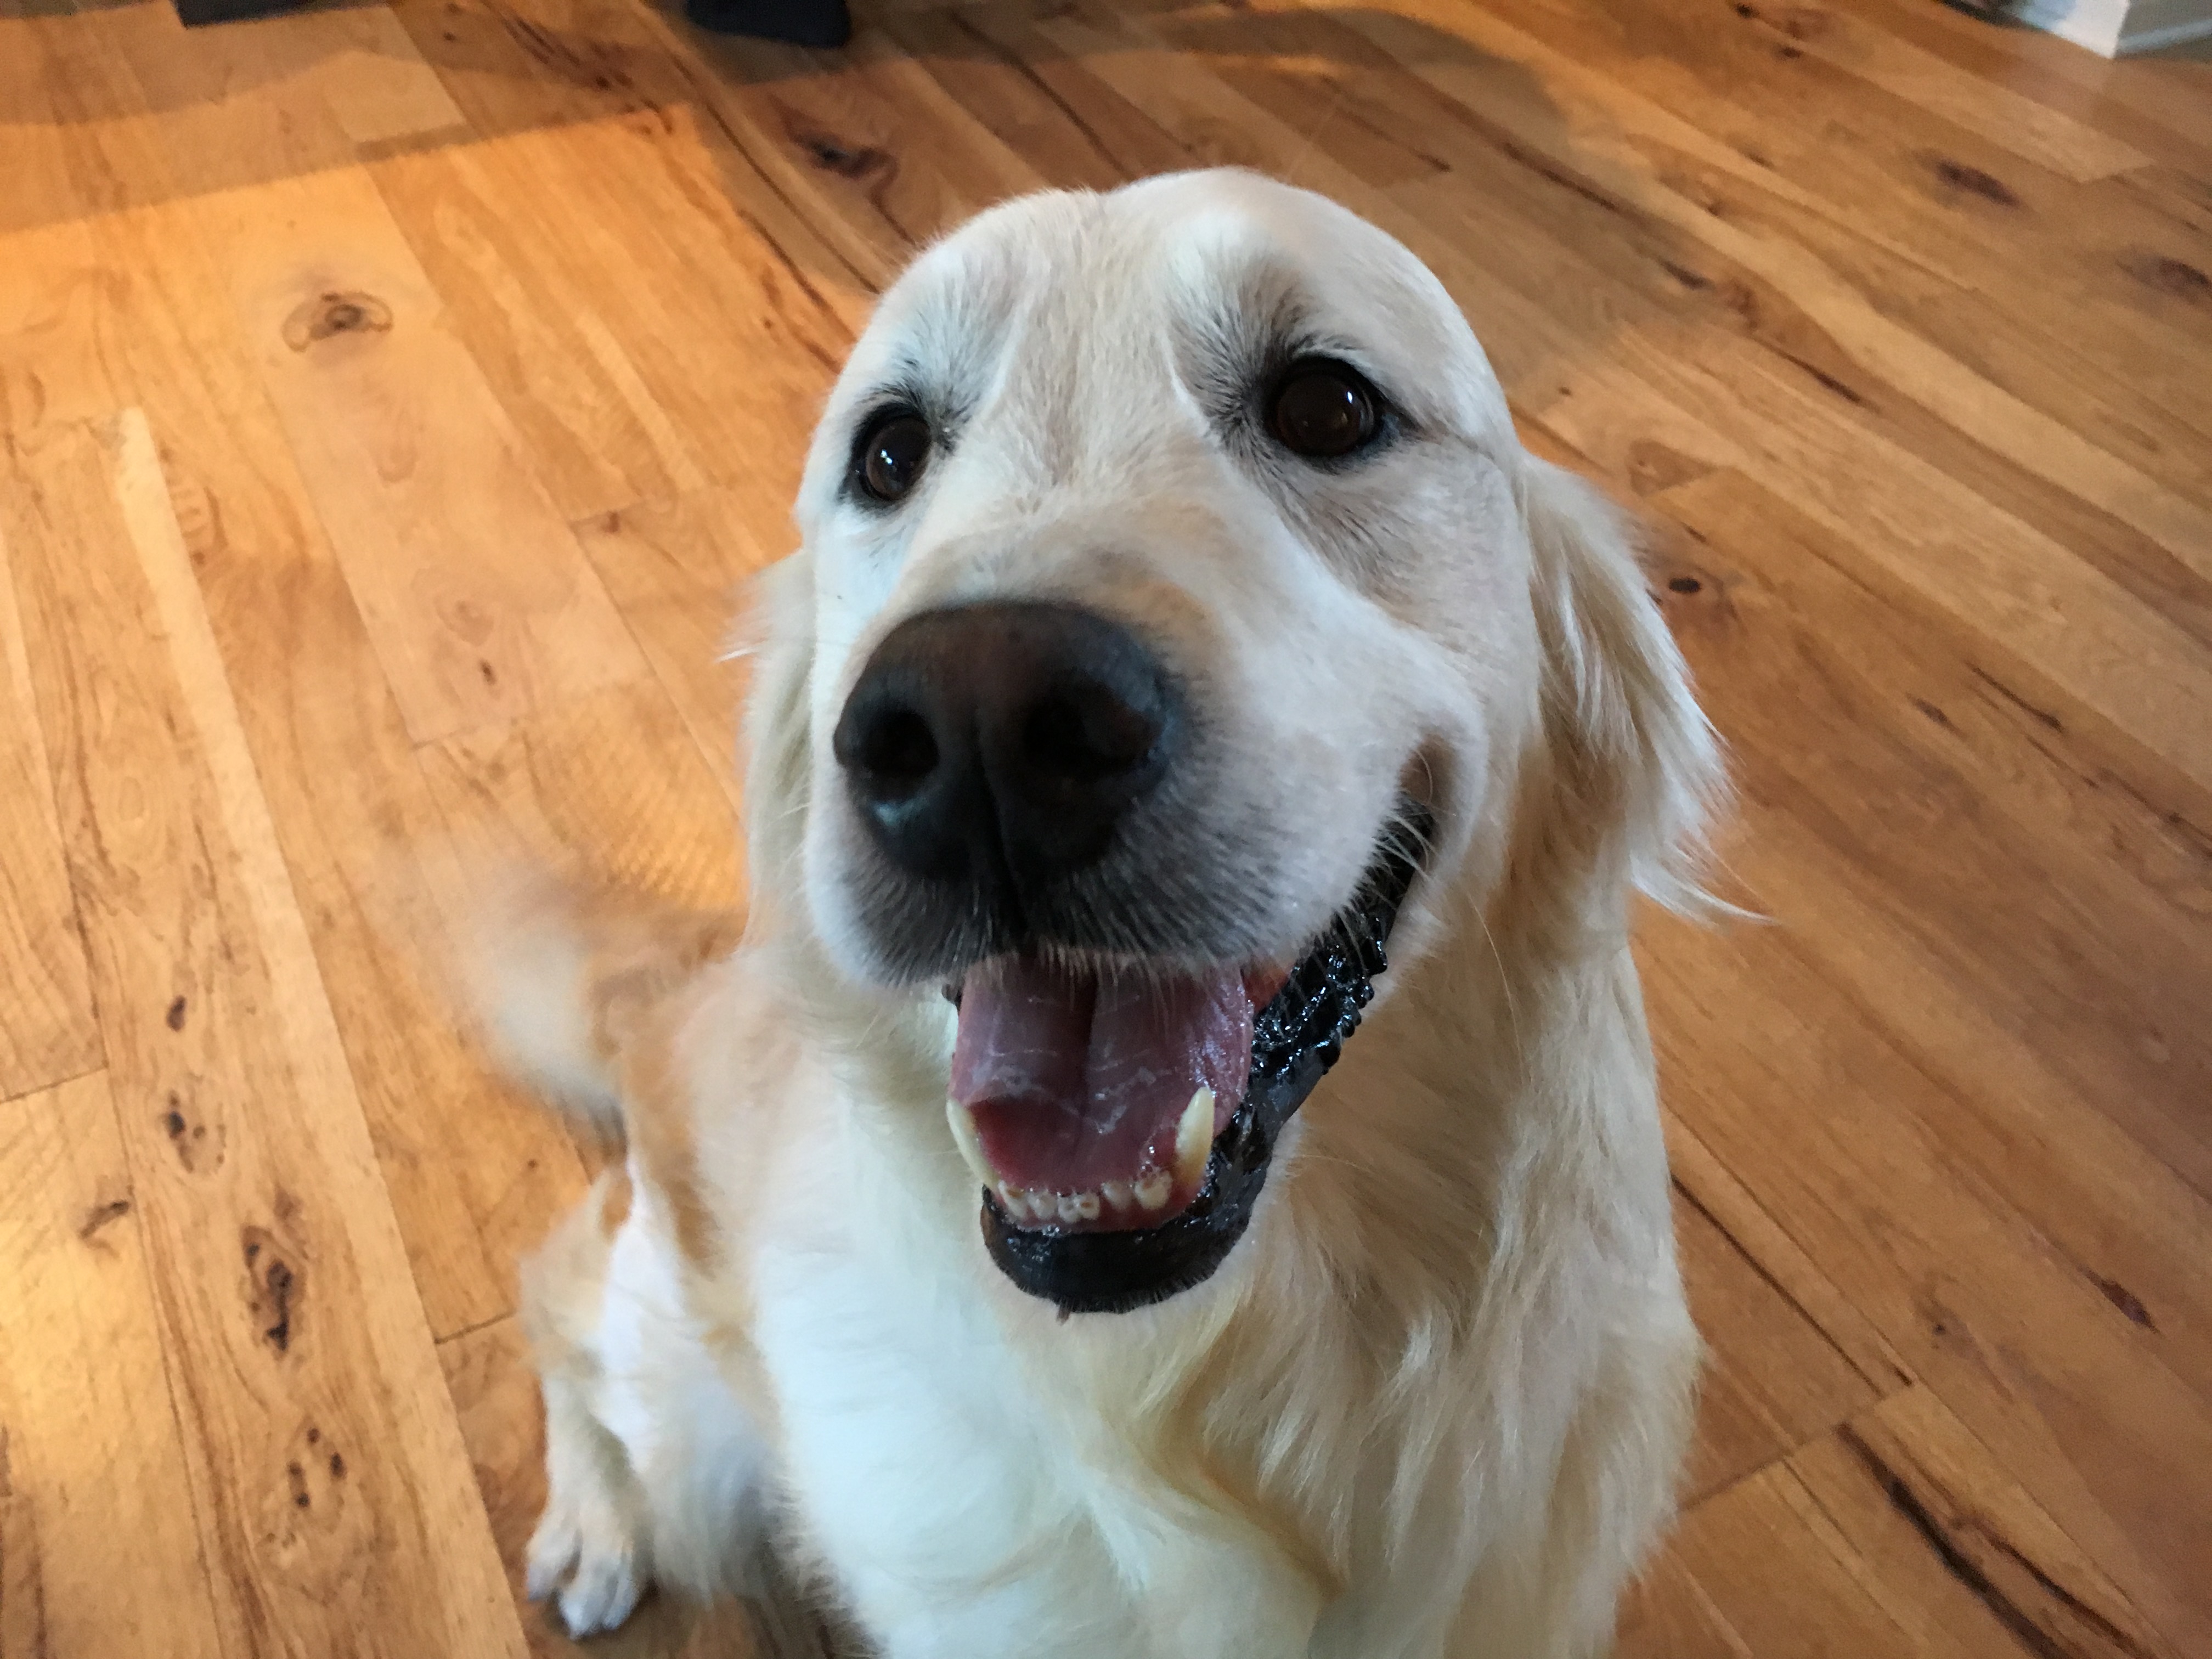 Cypress - Teaching a Formerly Abused English Cream Retriever to Stay to Build His Confidence